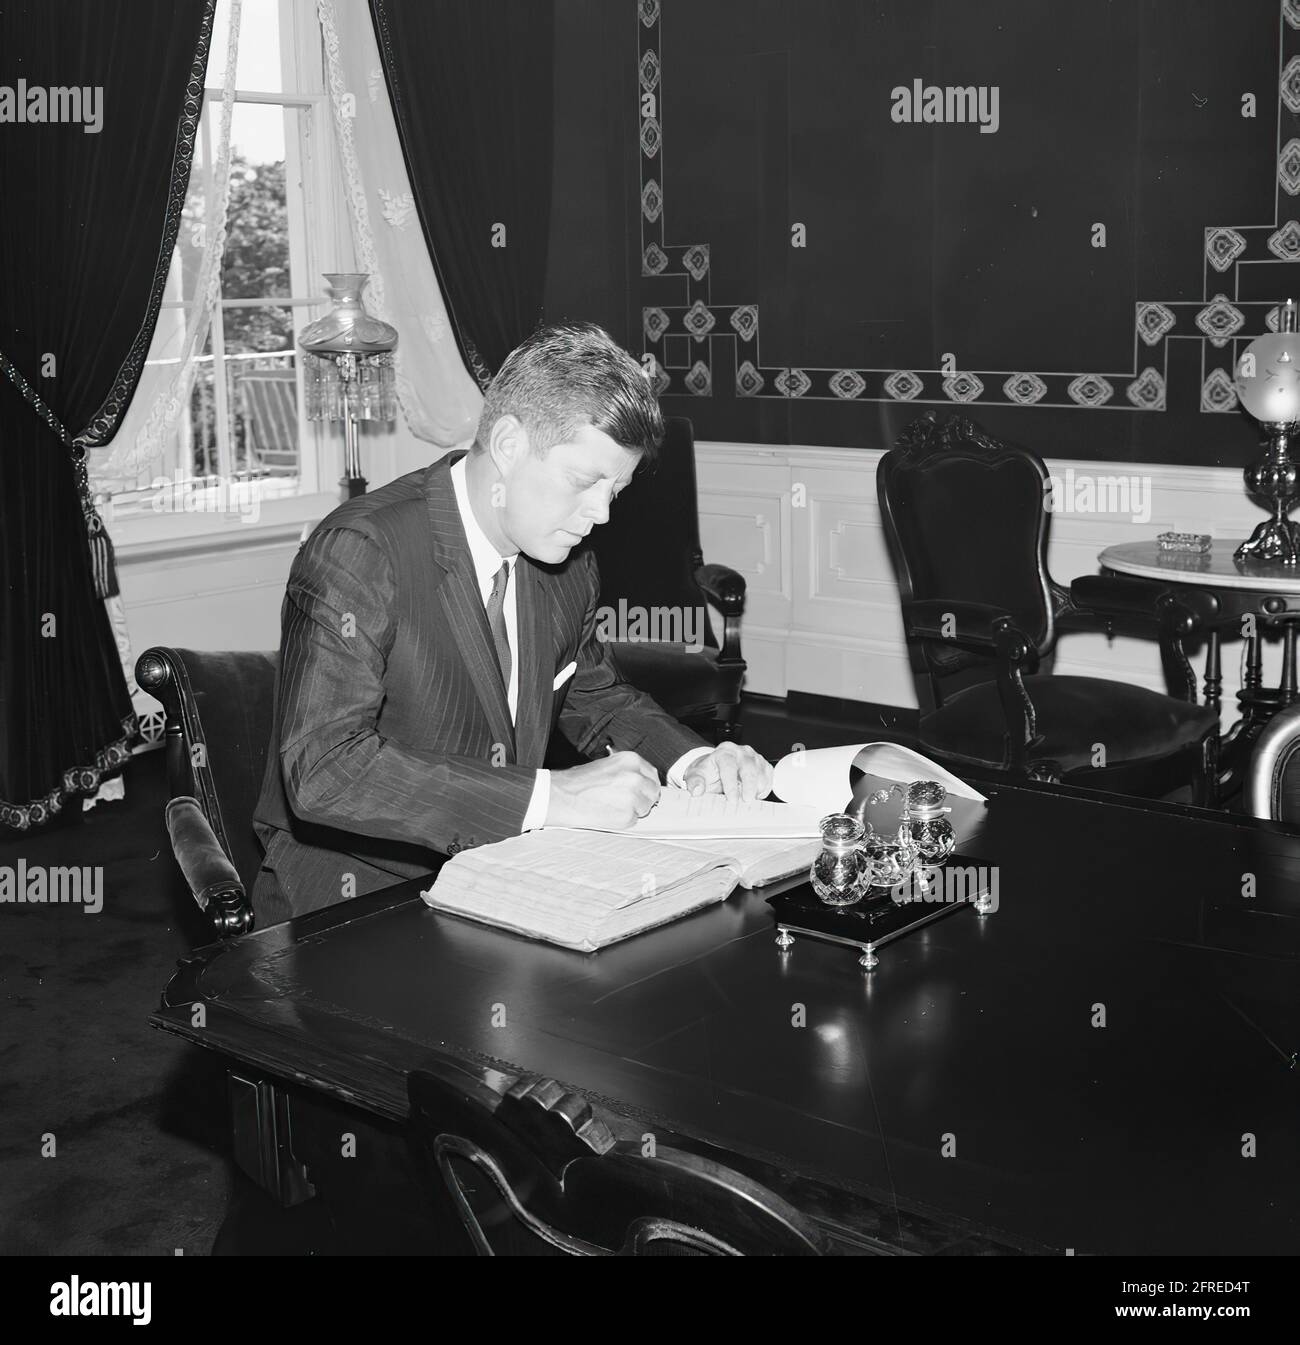 President Kennedy signs a document in the Treaty Room of the White House in Washington, DC.  Photographer: Robert Knudsen, the White House . Stock Photo